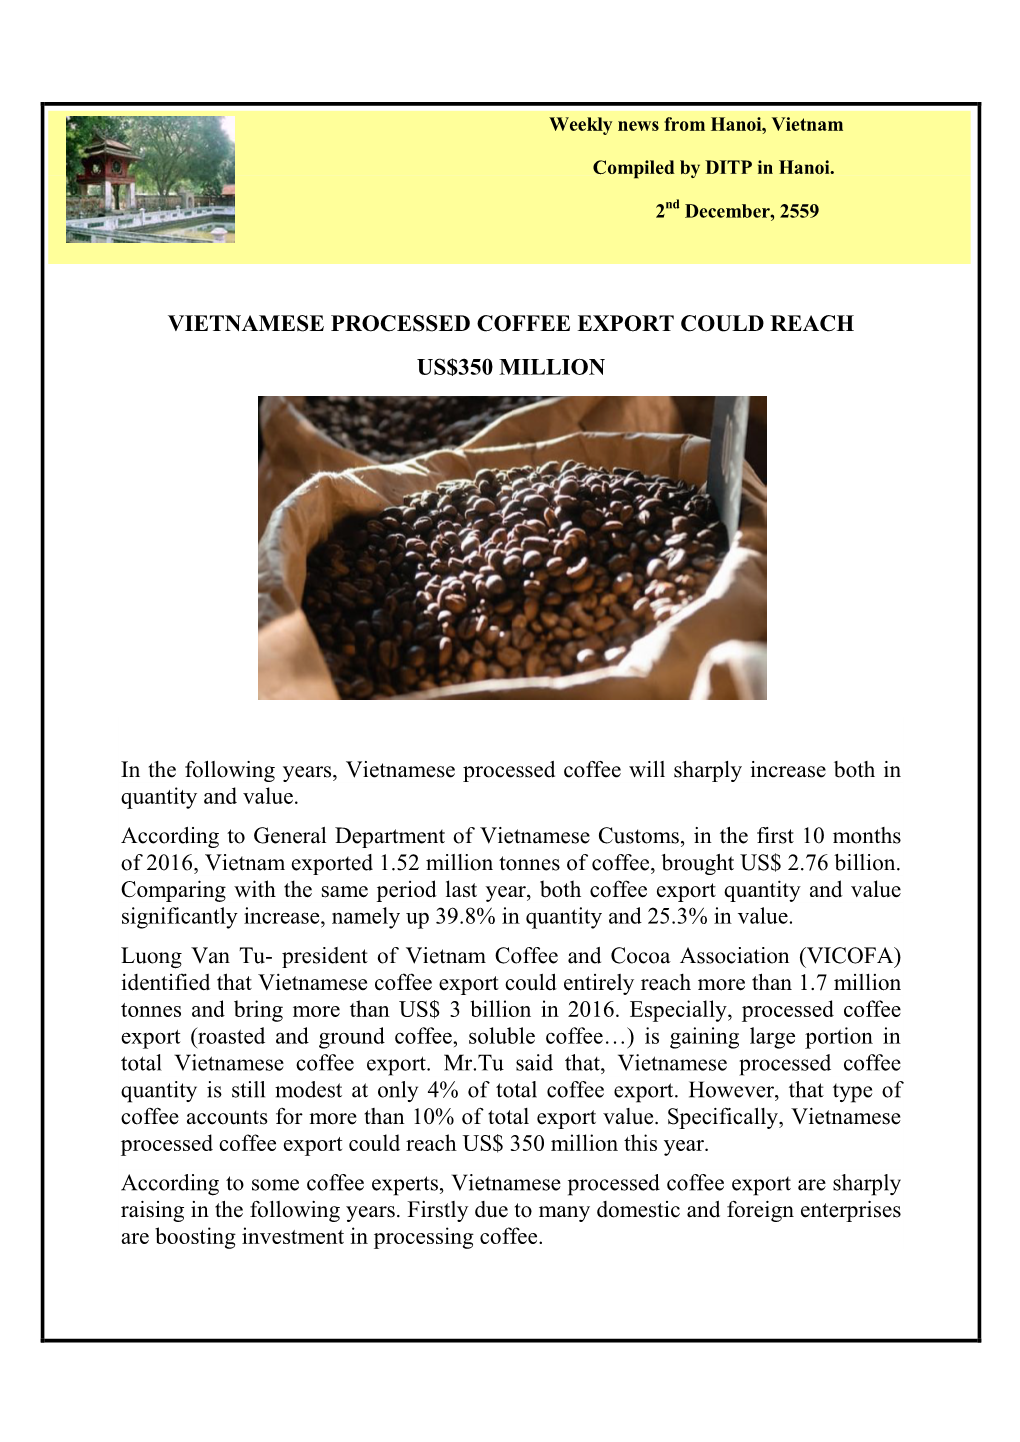 Vietnamese Processed Coffee Export Could Reach Us$350 Million